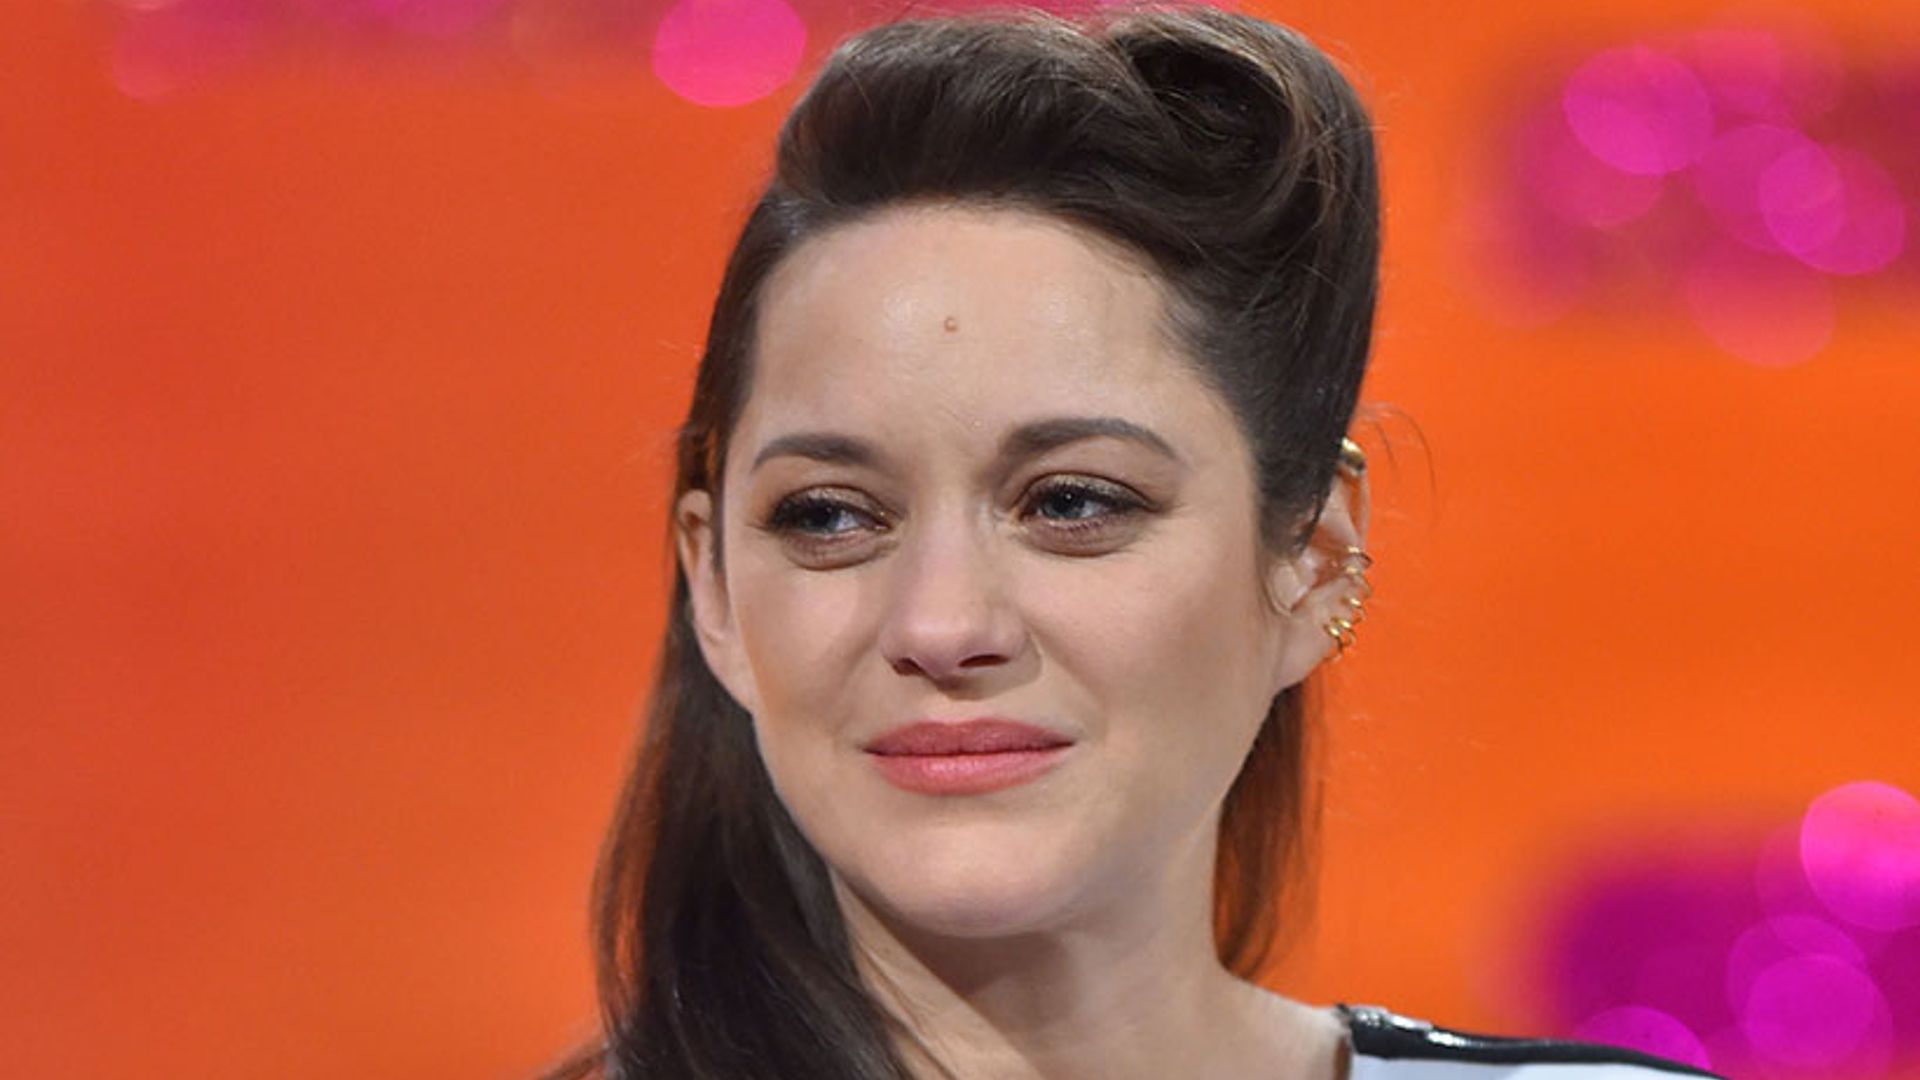 Marion Cotillard reveals cheeky on-set pranks with partner Guillaume Canet